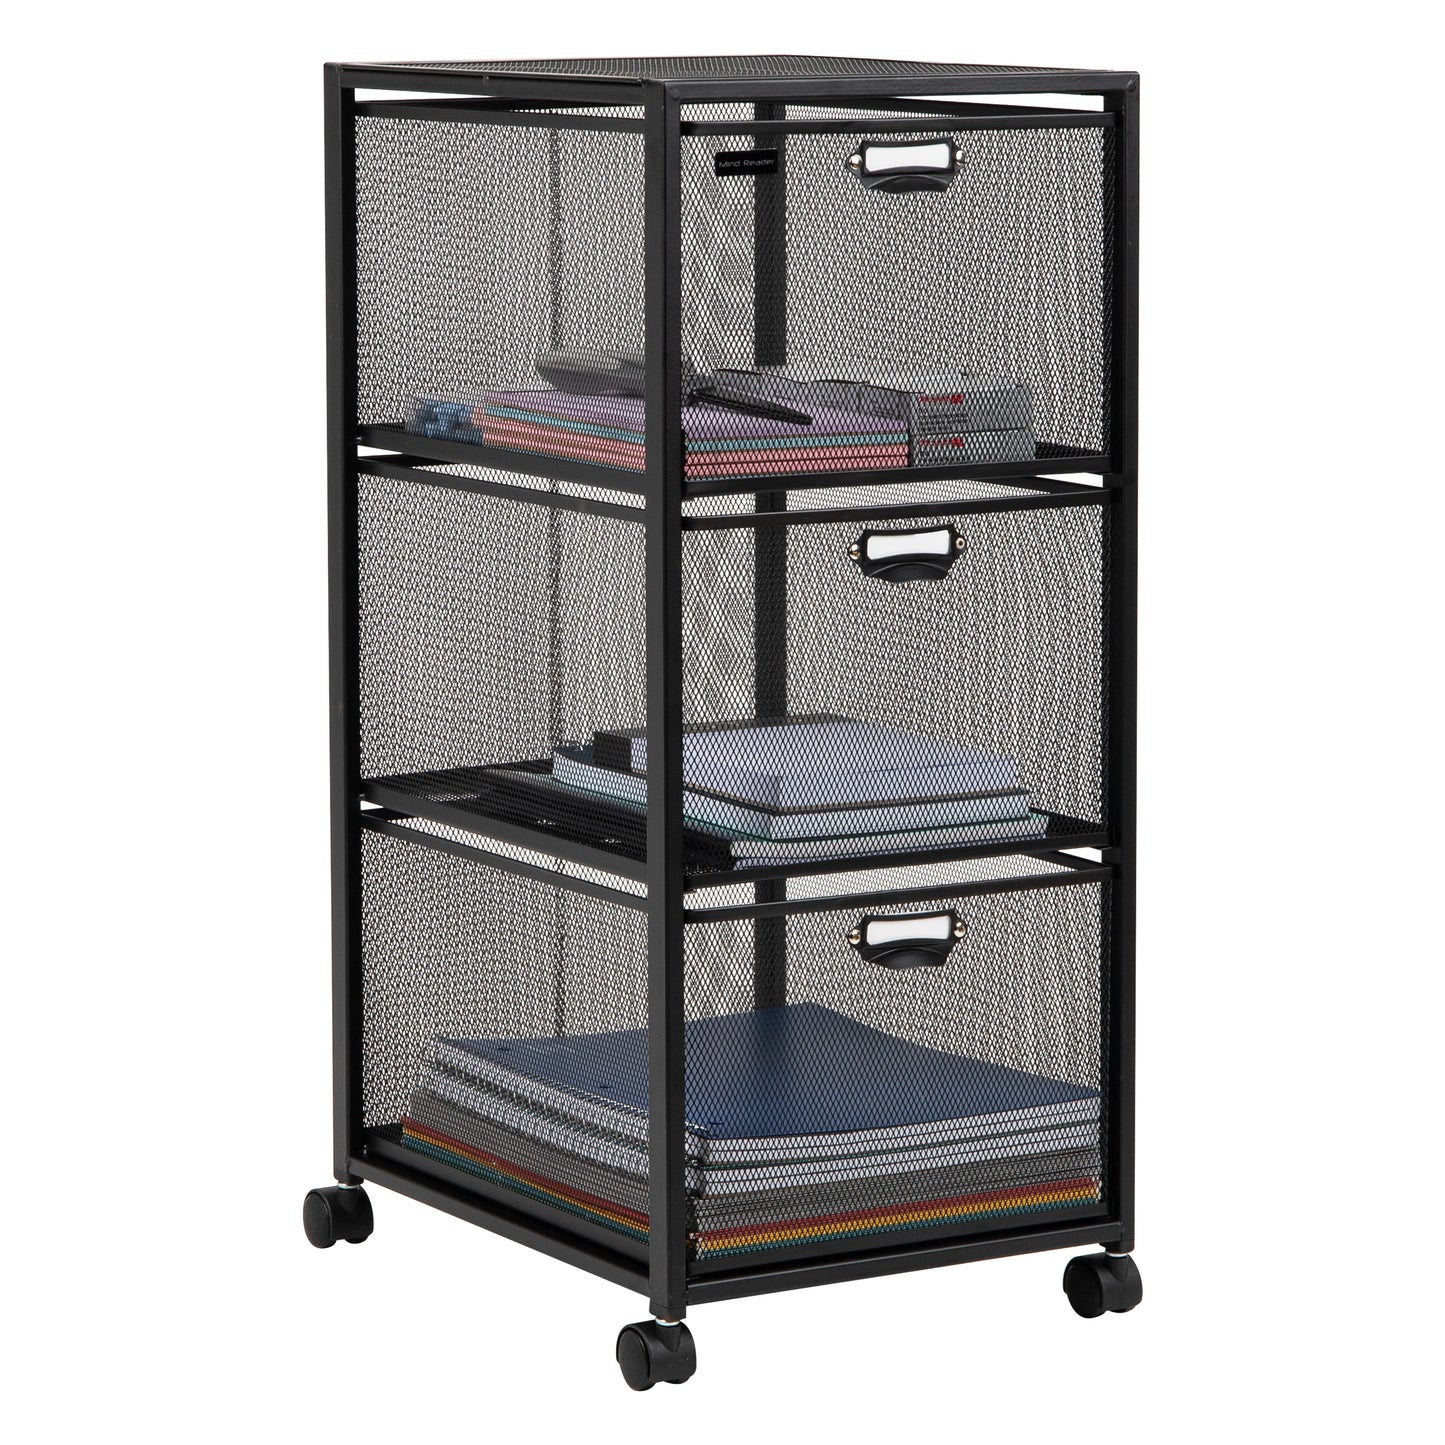 Mind Reader Network Collection, Rolling File Cabinet with Removable Drawers, Omnidirectional Wheels, Desk Organizer, Lightweight and Portable, Metal Mesh, Black